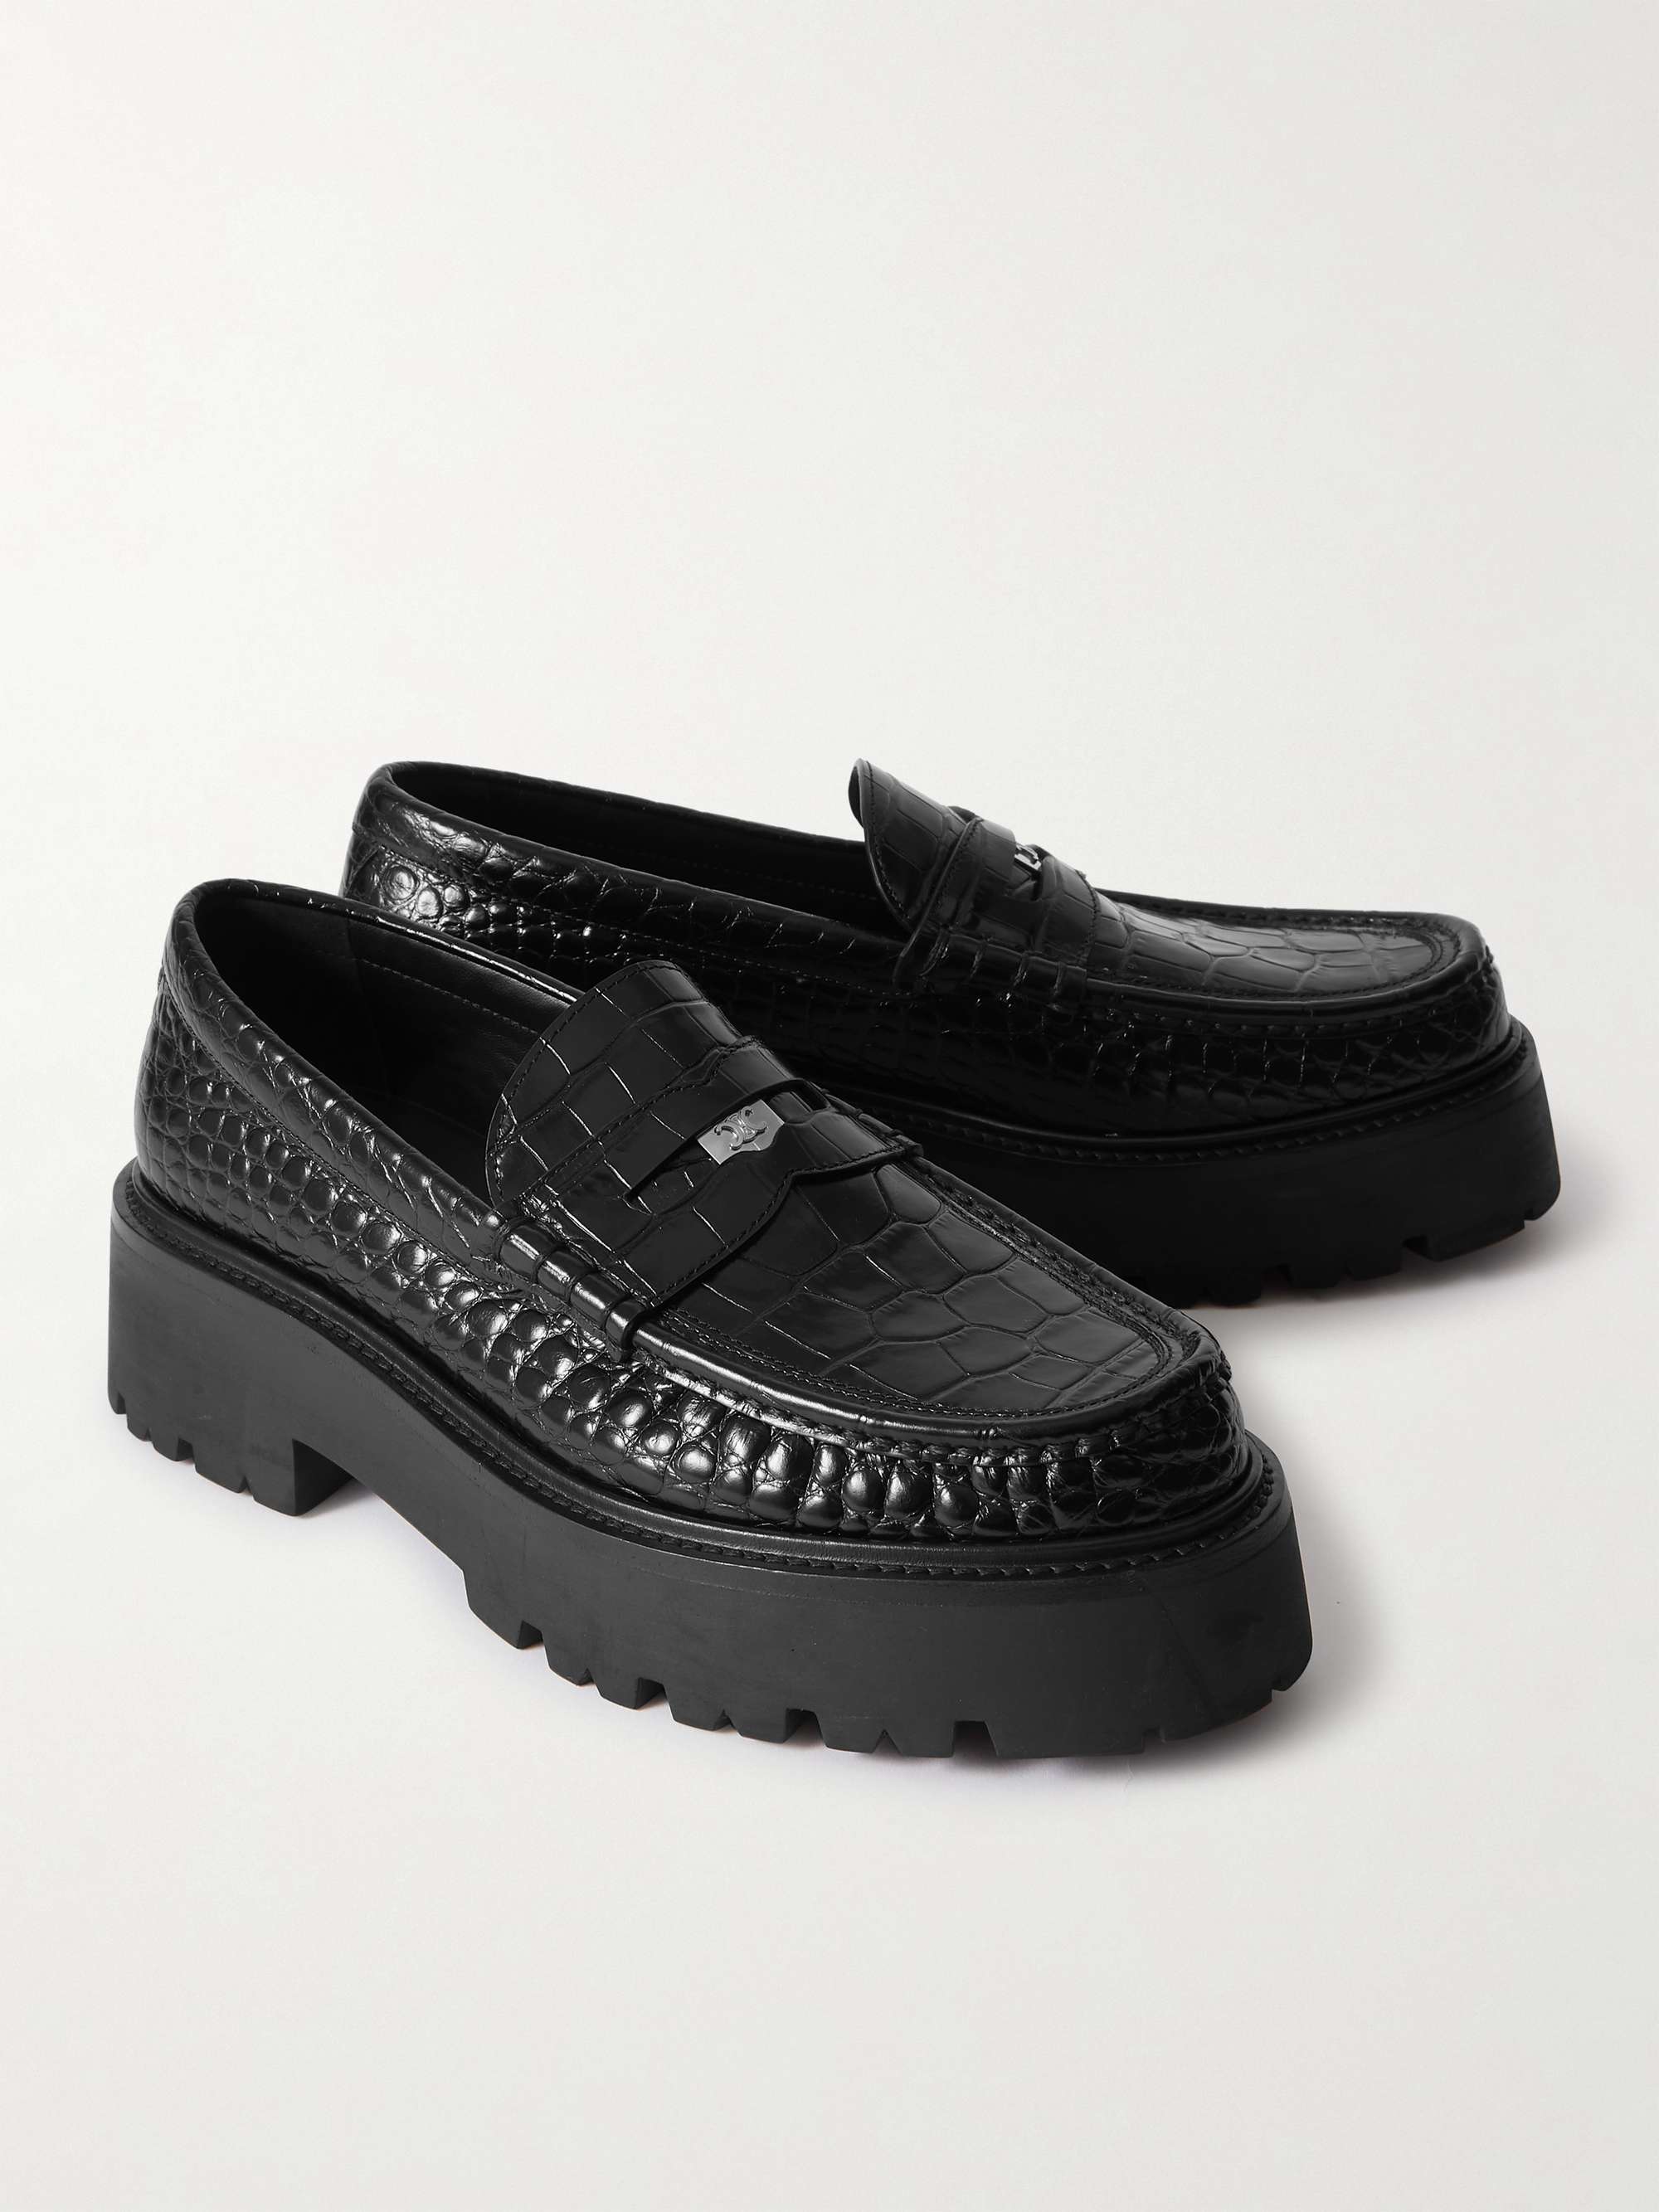 CELINE HOMME Croc-Effect Leather Penny Loafers